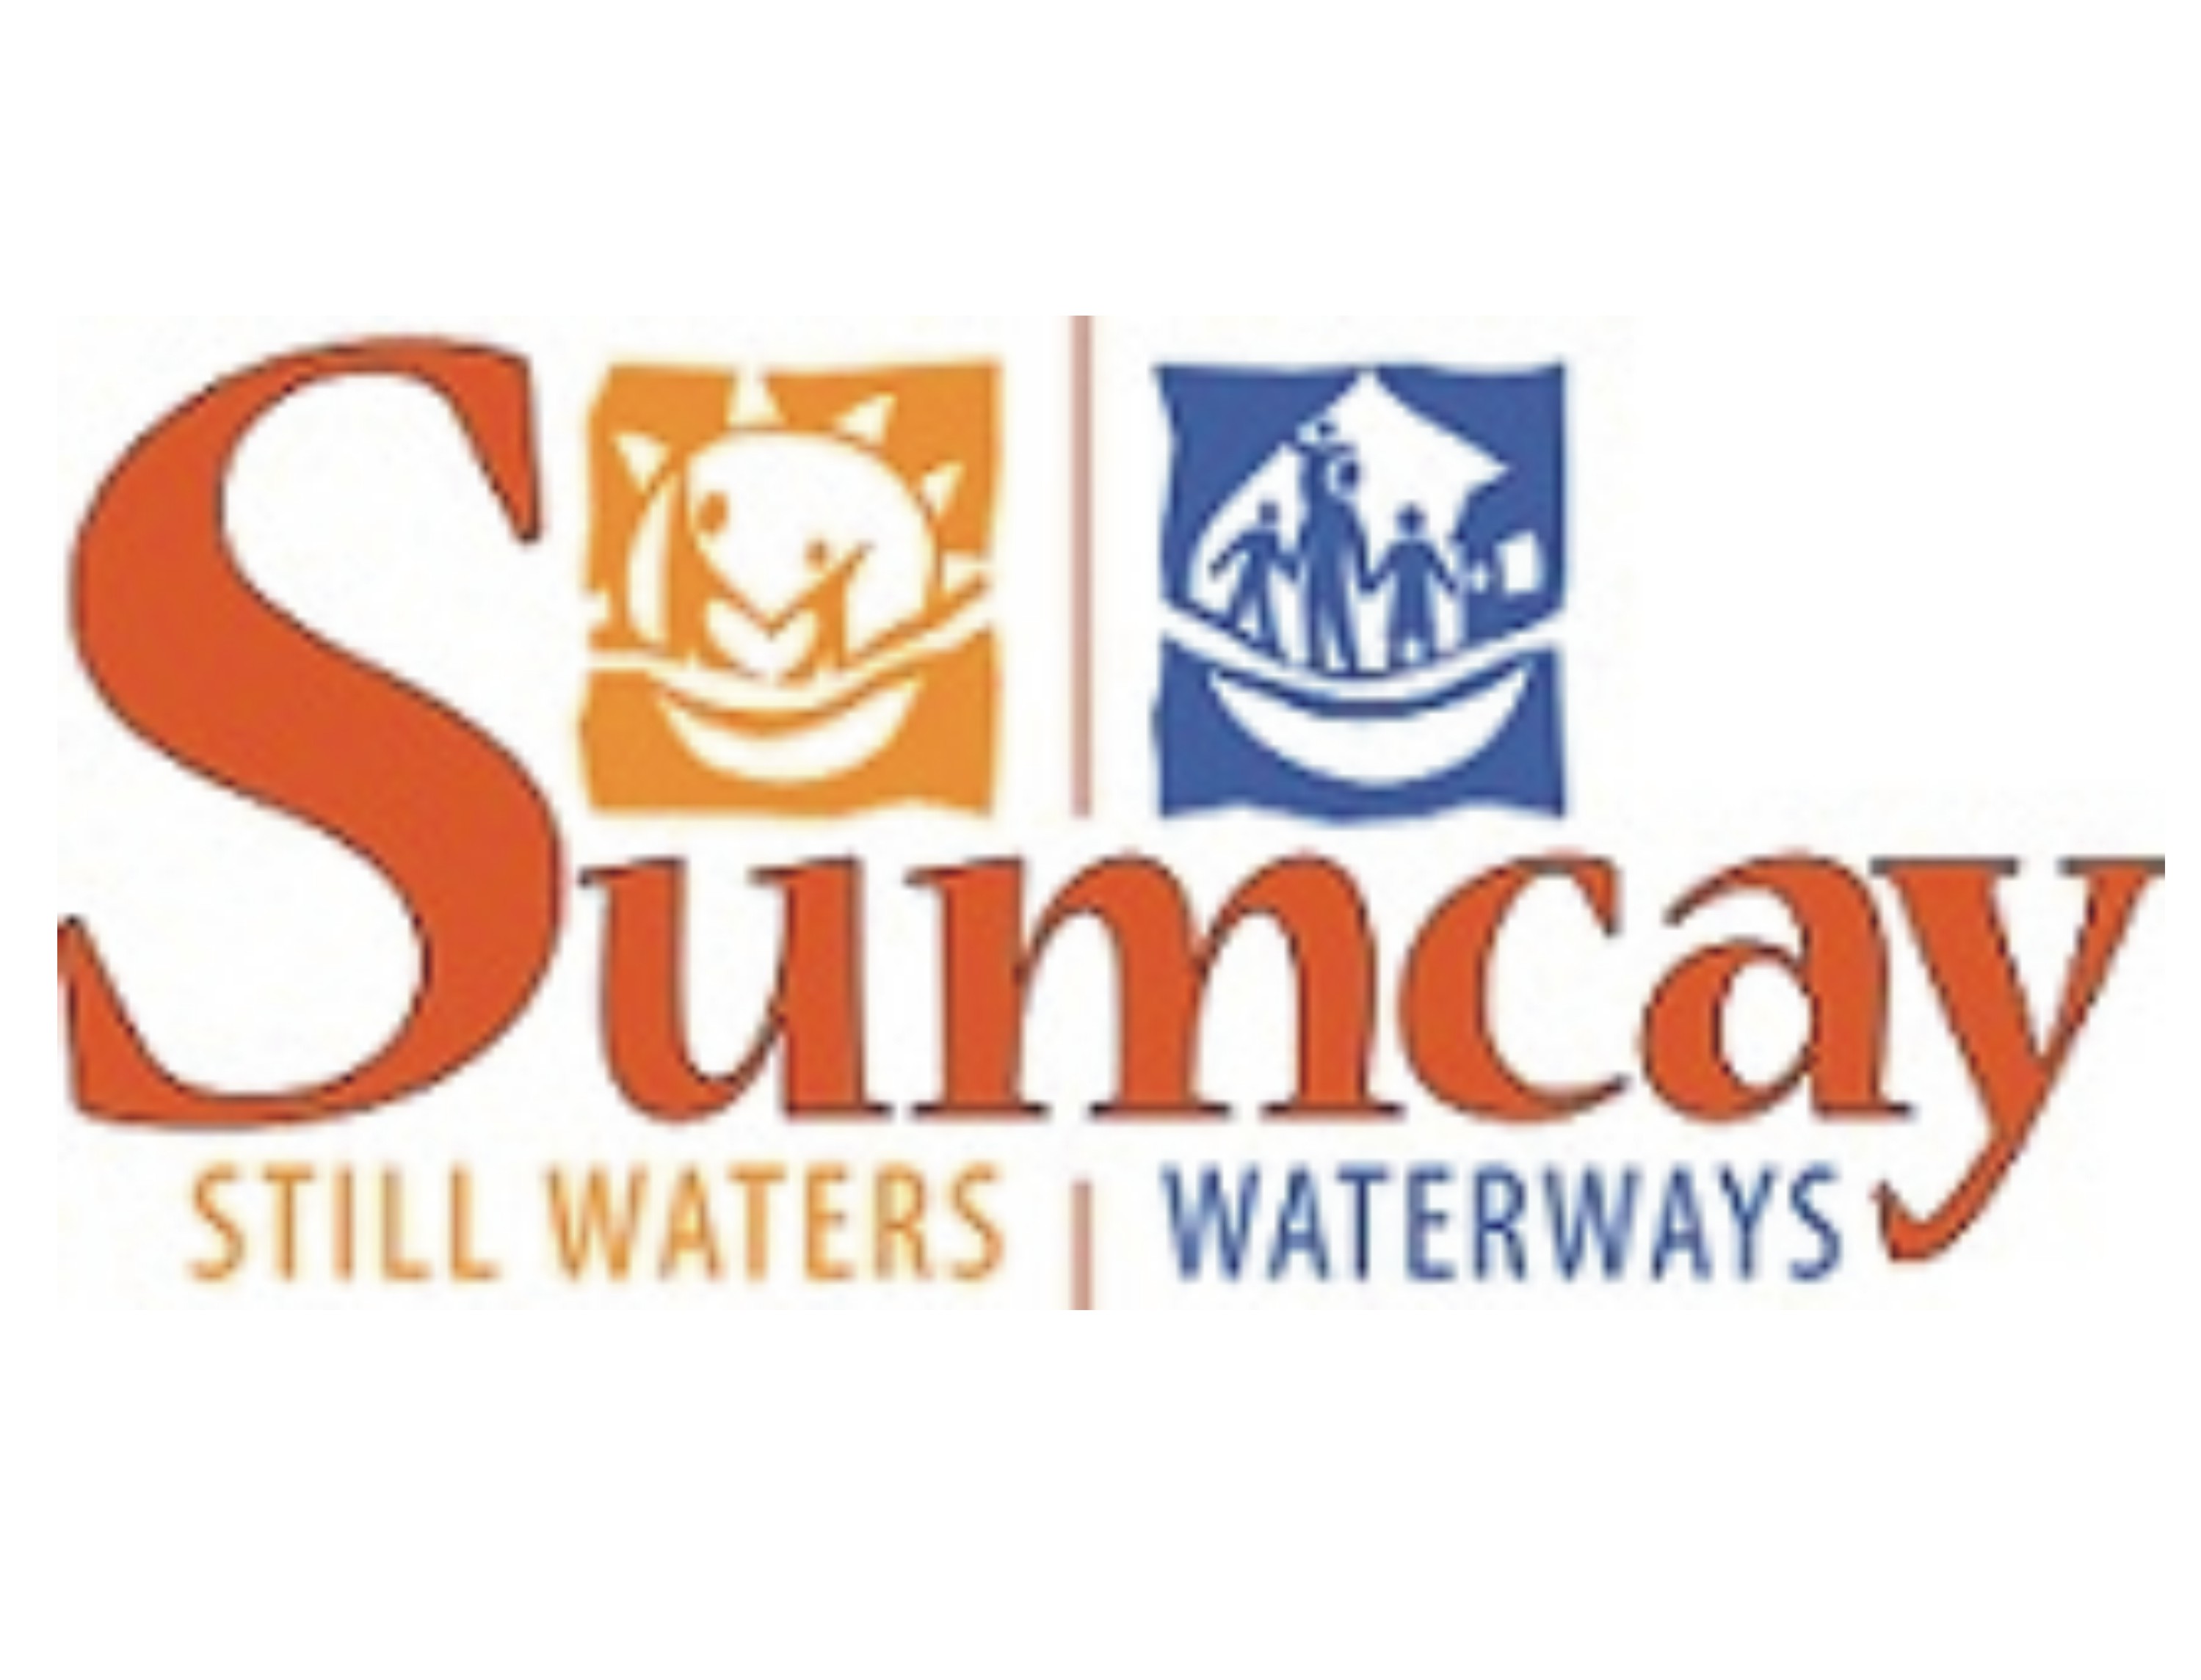 Sumcay - Still waters & Waterways - Tranquillity on the banks of the Swartkops River only 20 kilometres from Port Elizabeth offers a great variety of birdlife.  Waterways campsite are the smaller of the 2 campsites of Sumcay.